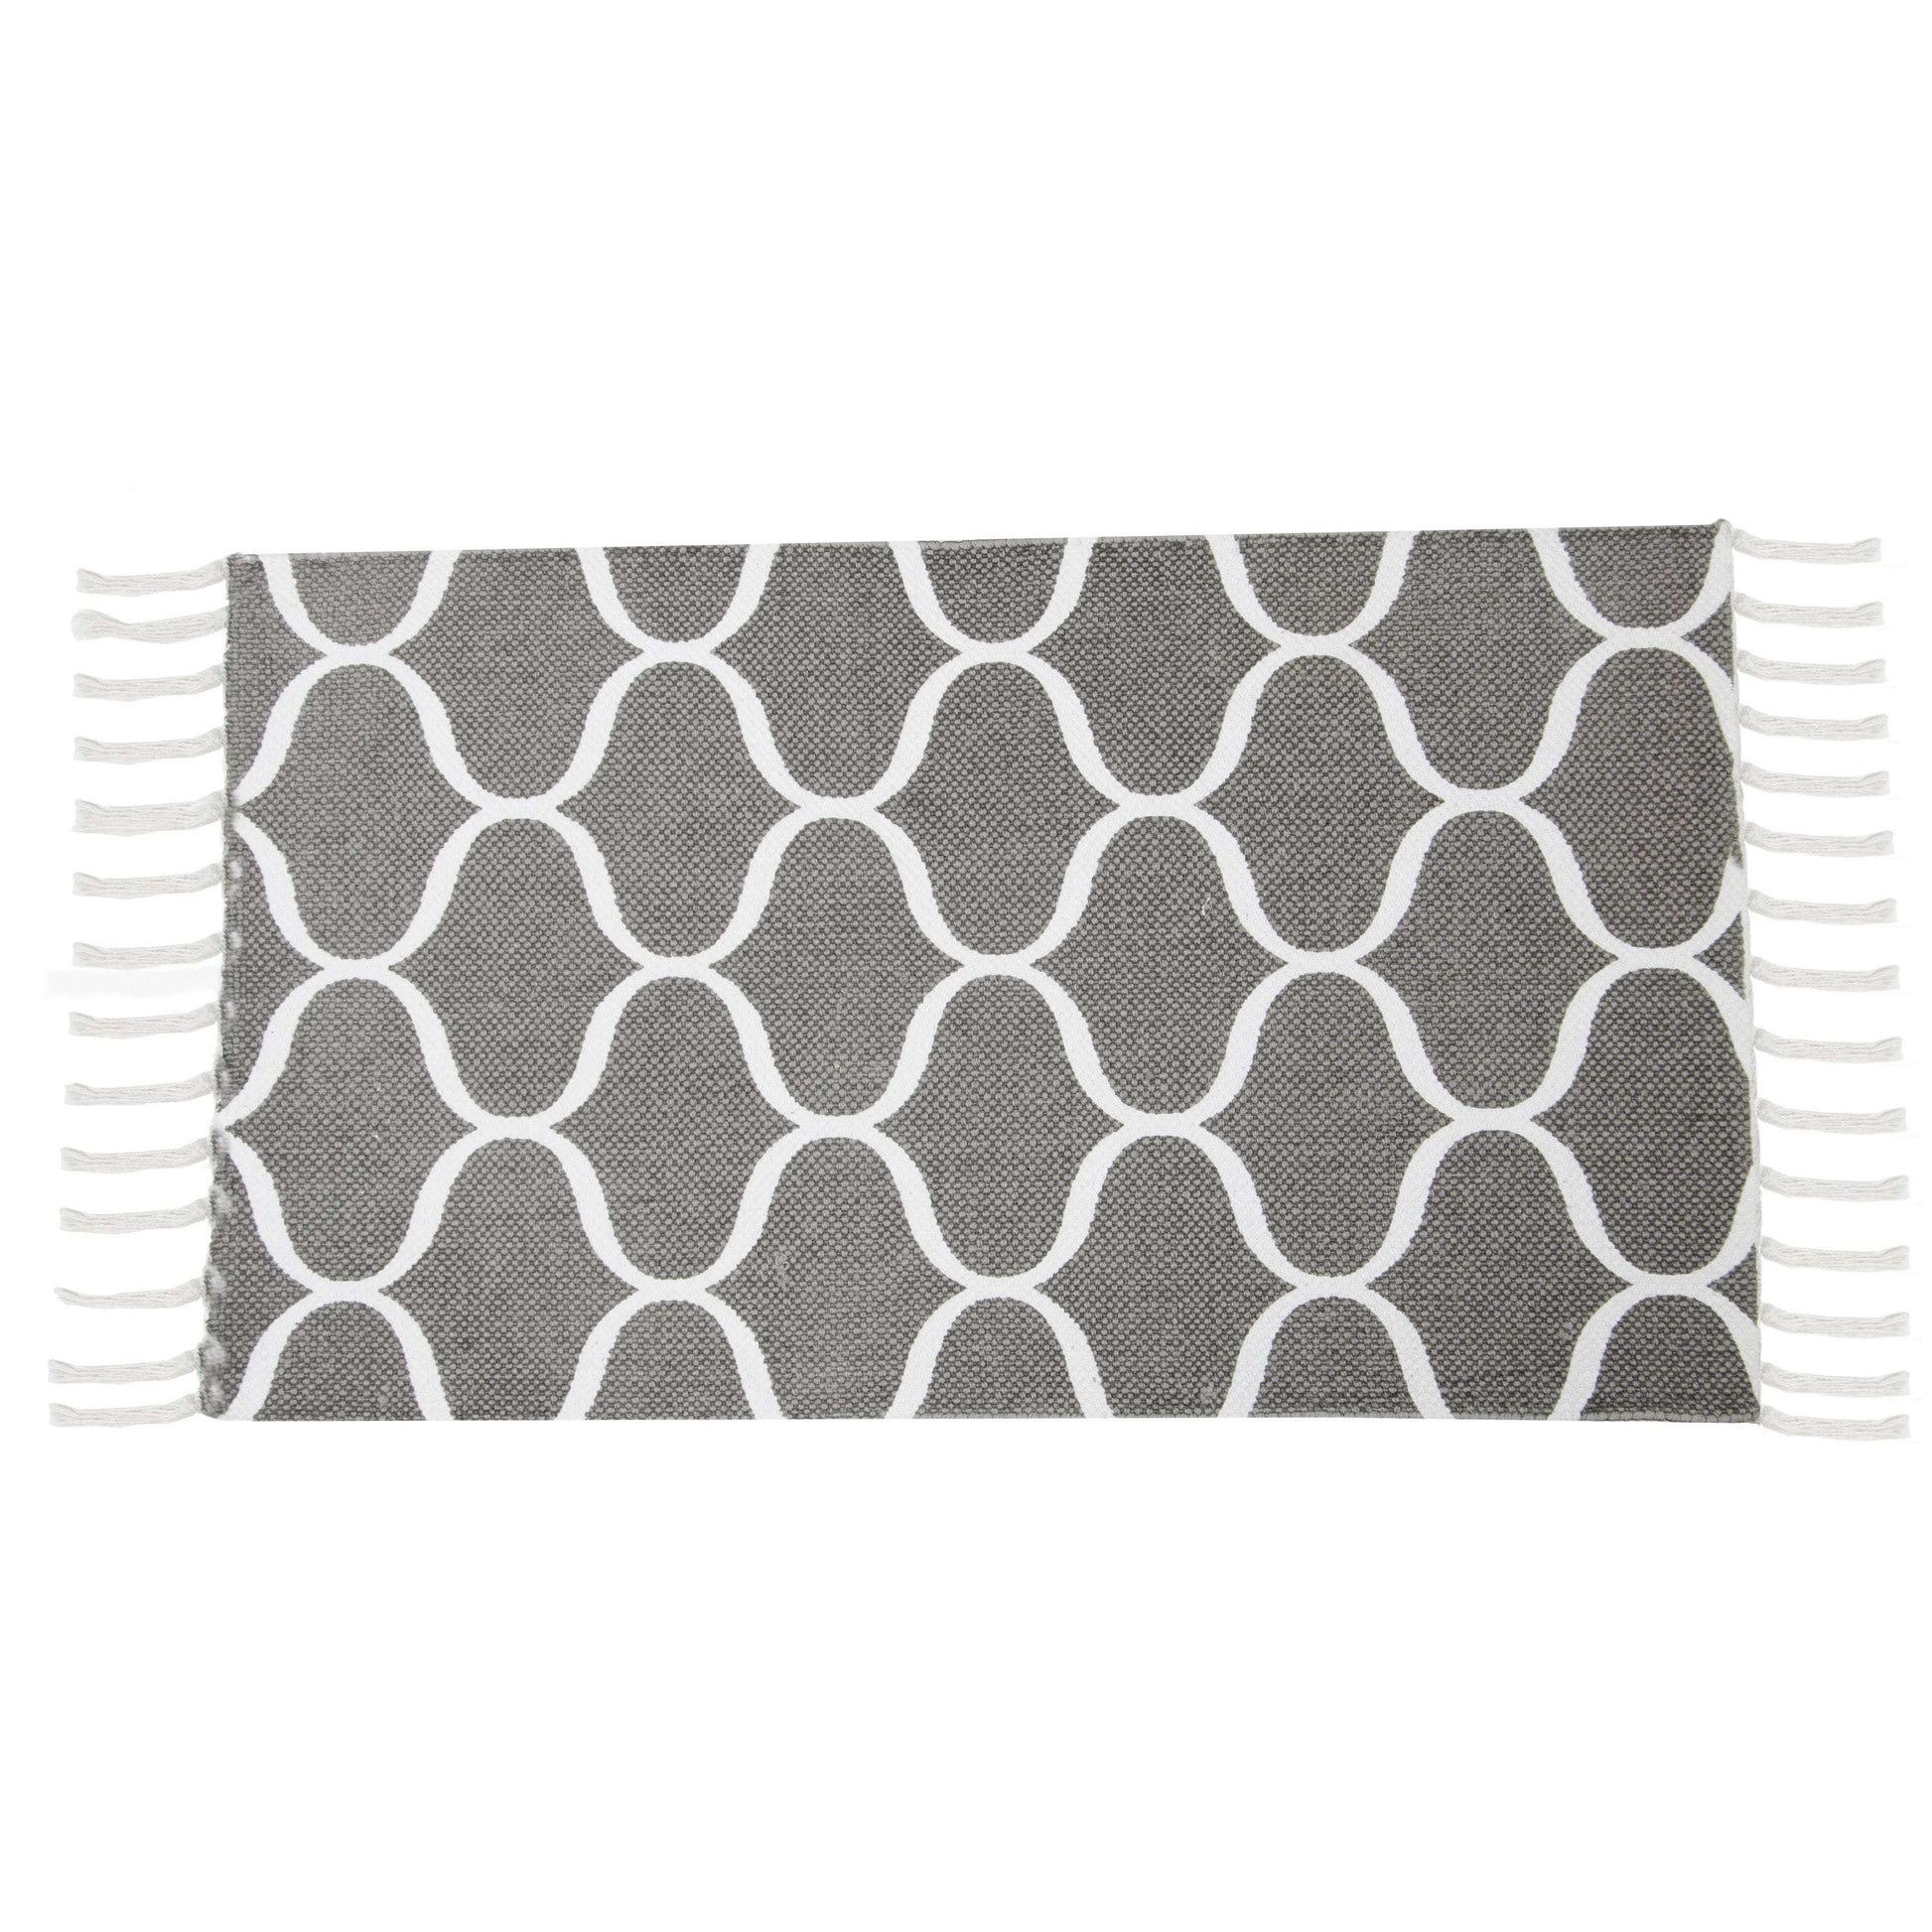 SWHF Double Twisted Cotton Printed & Solid Rug, Set of 2 : 18 X 30 In (Grey) - SWHF